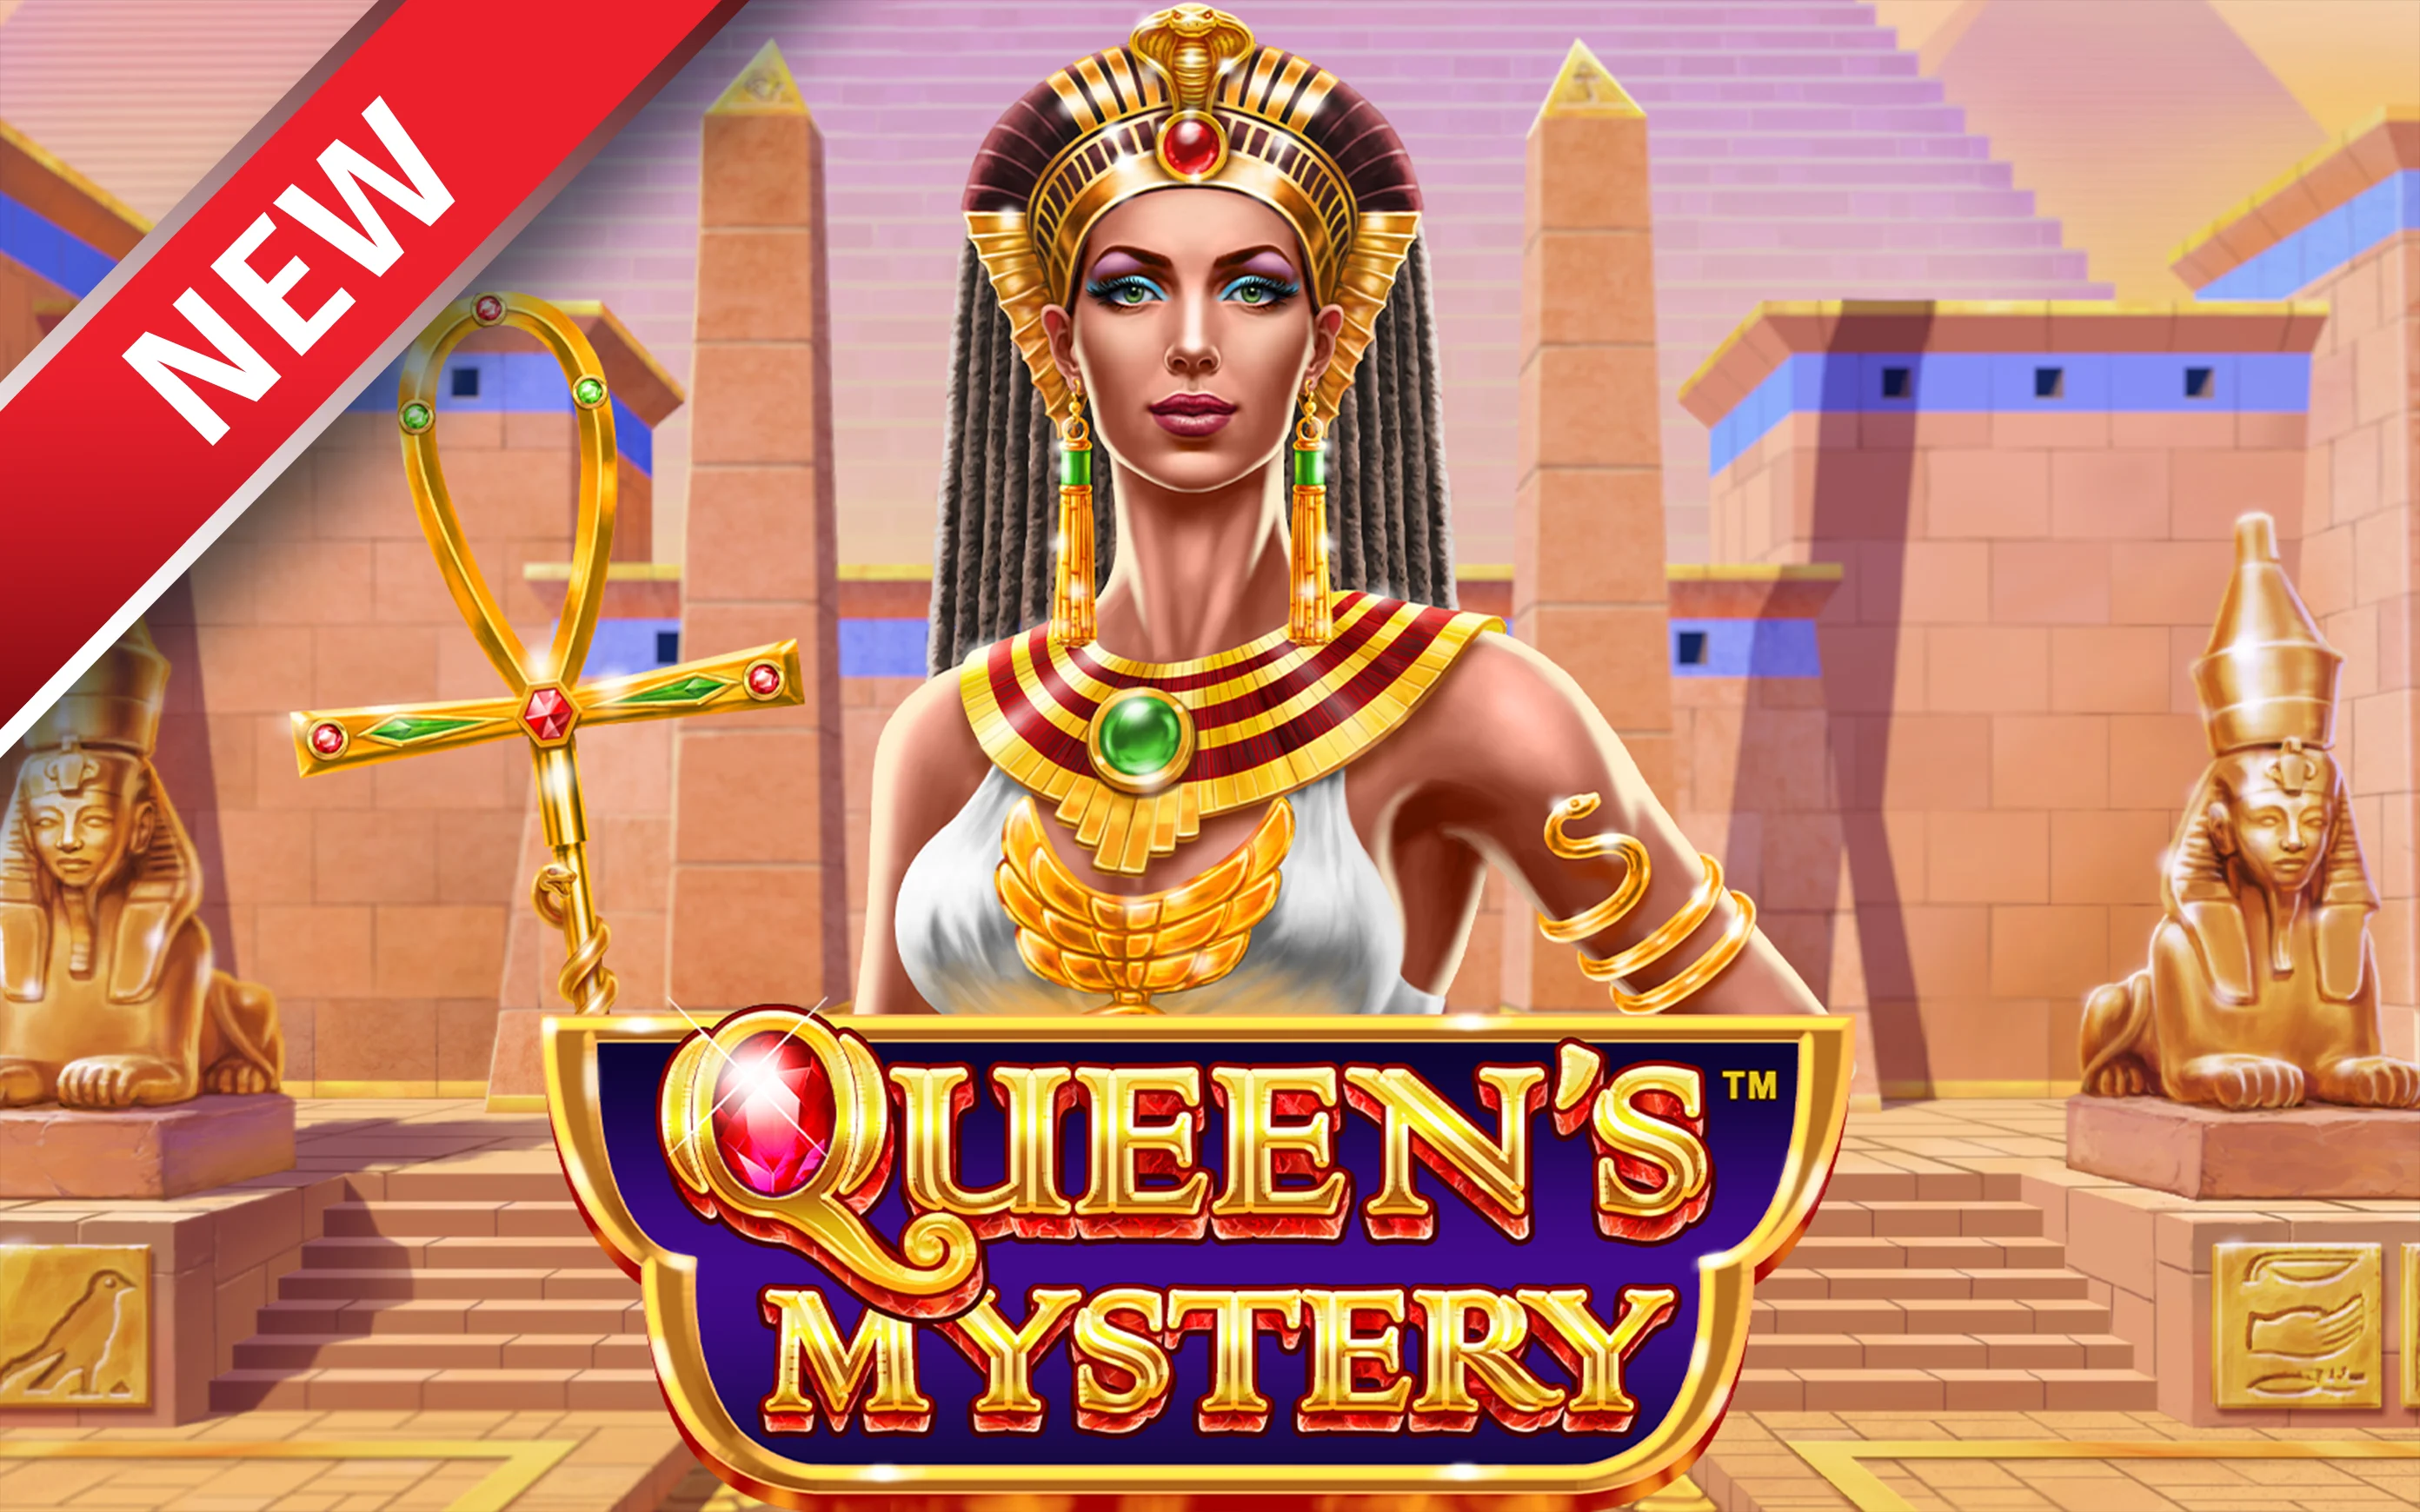 Play Queen’s Mystery™ on Starcasino.be online casino